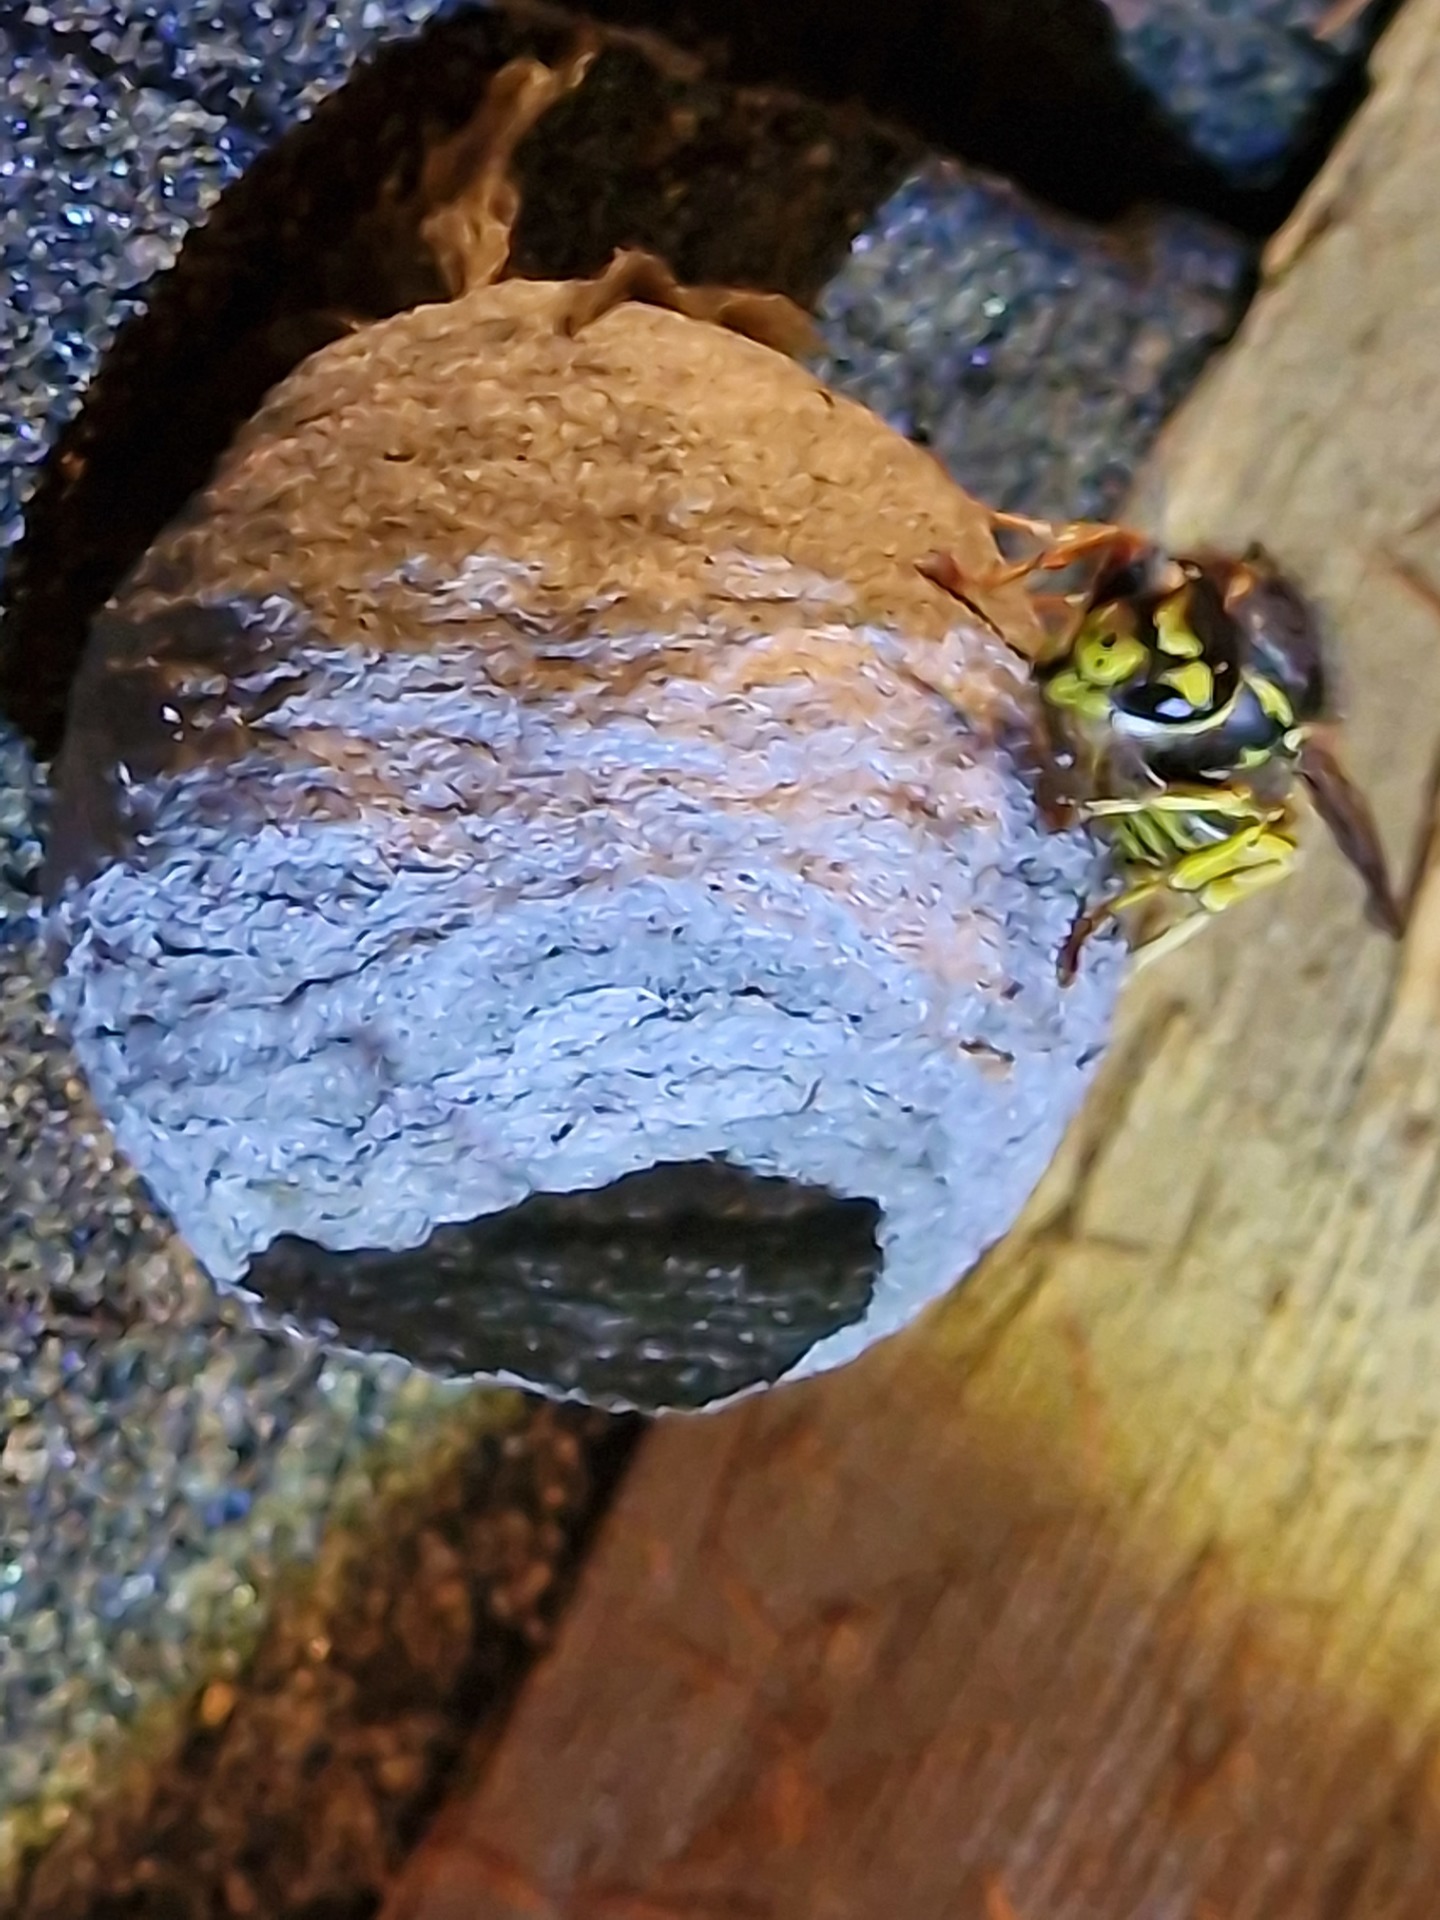 Wasp on a nest